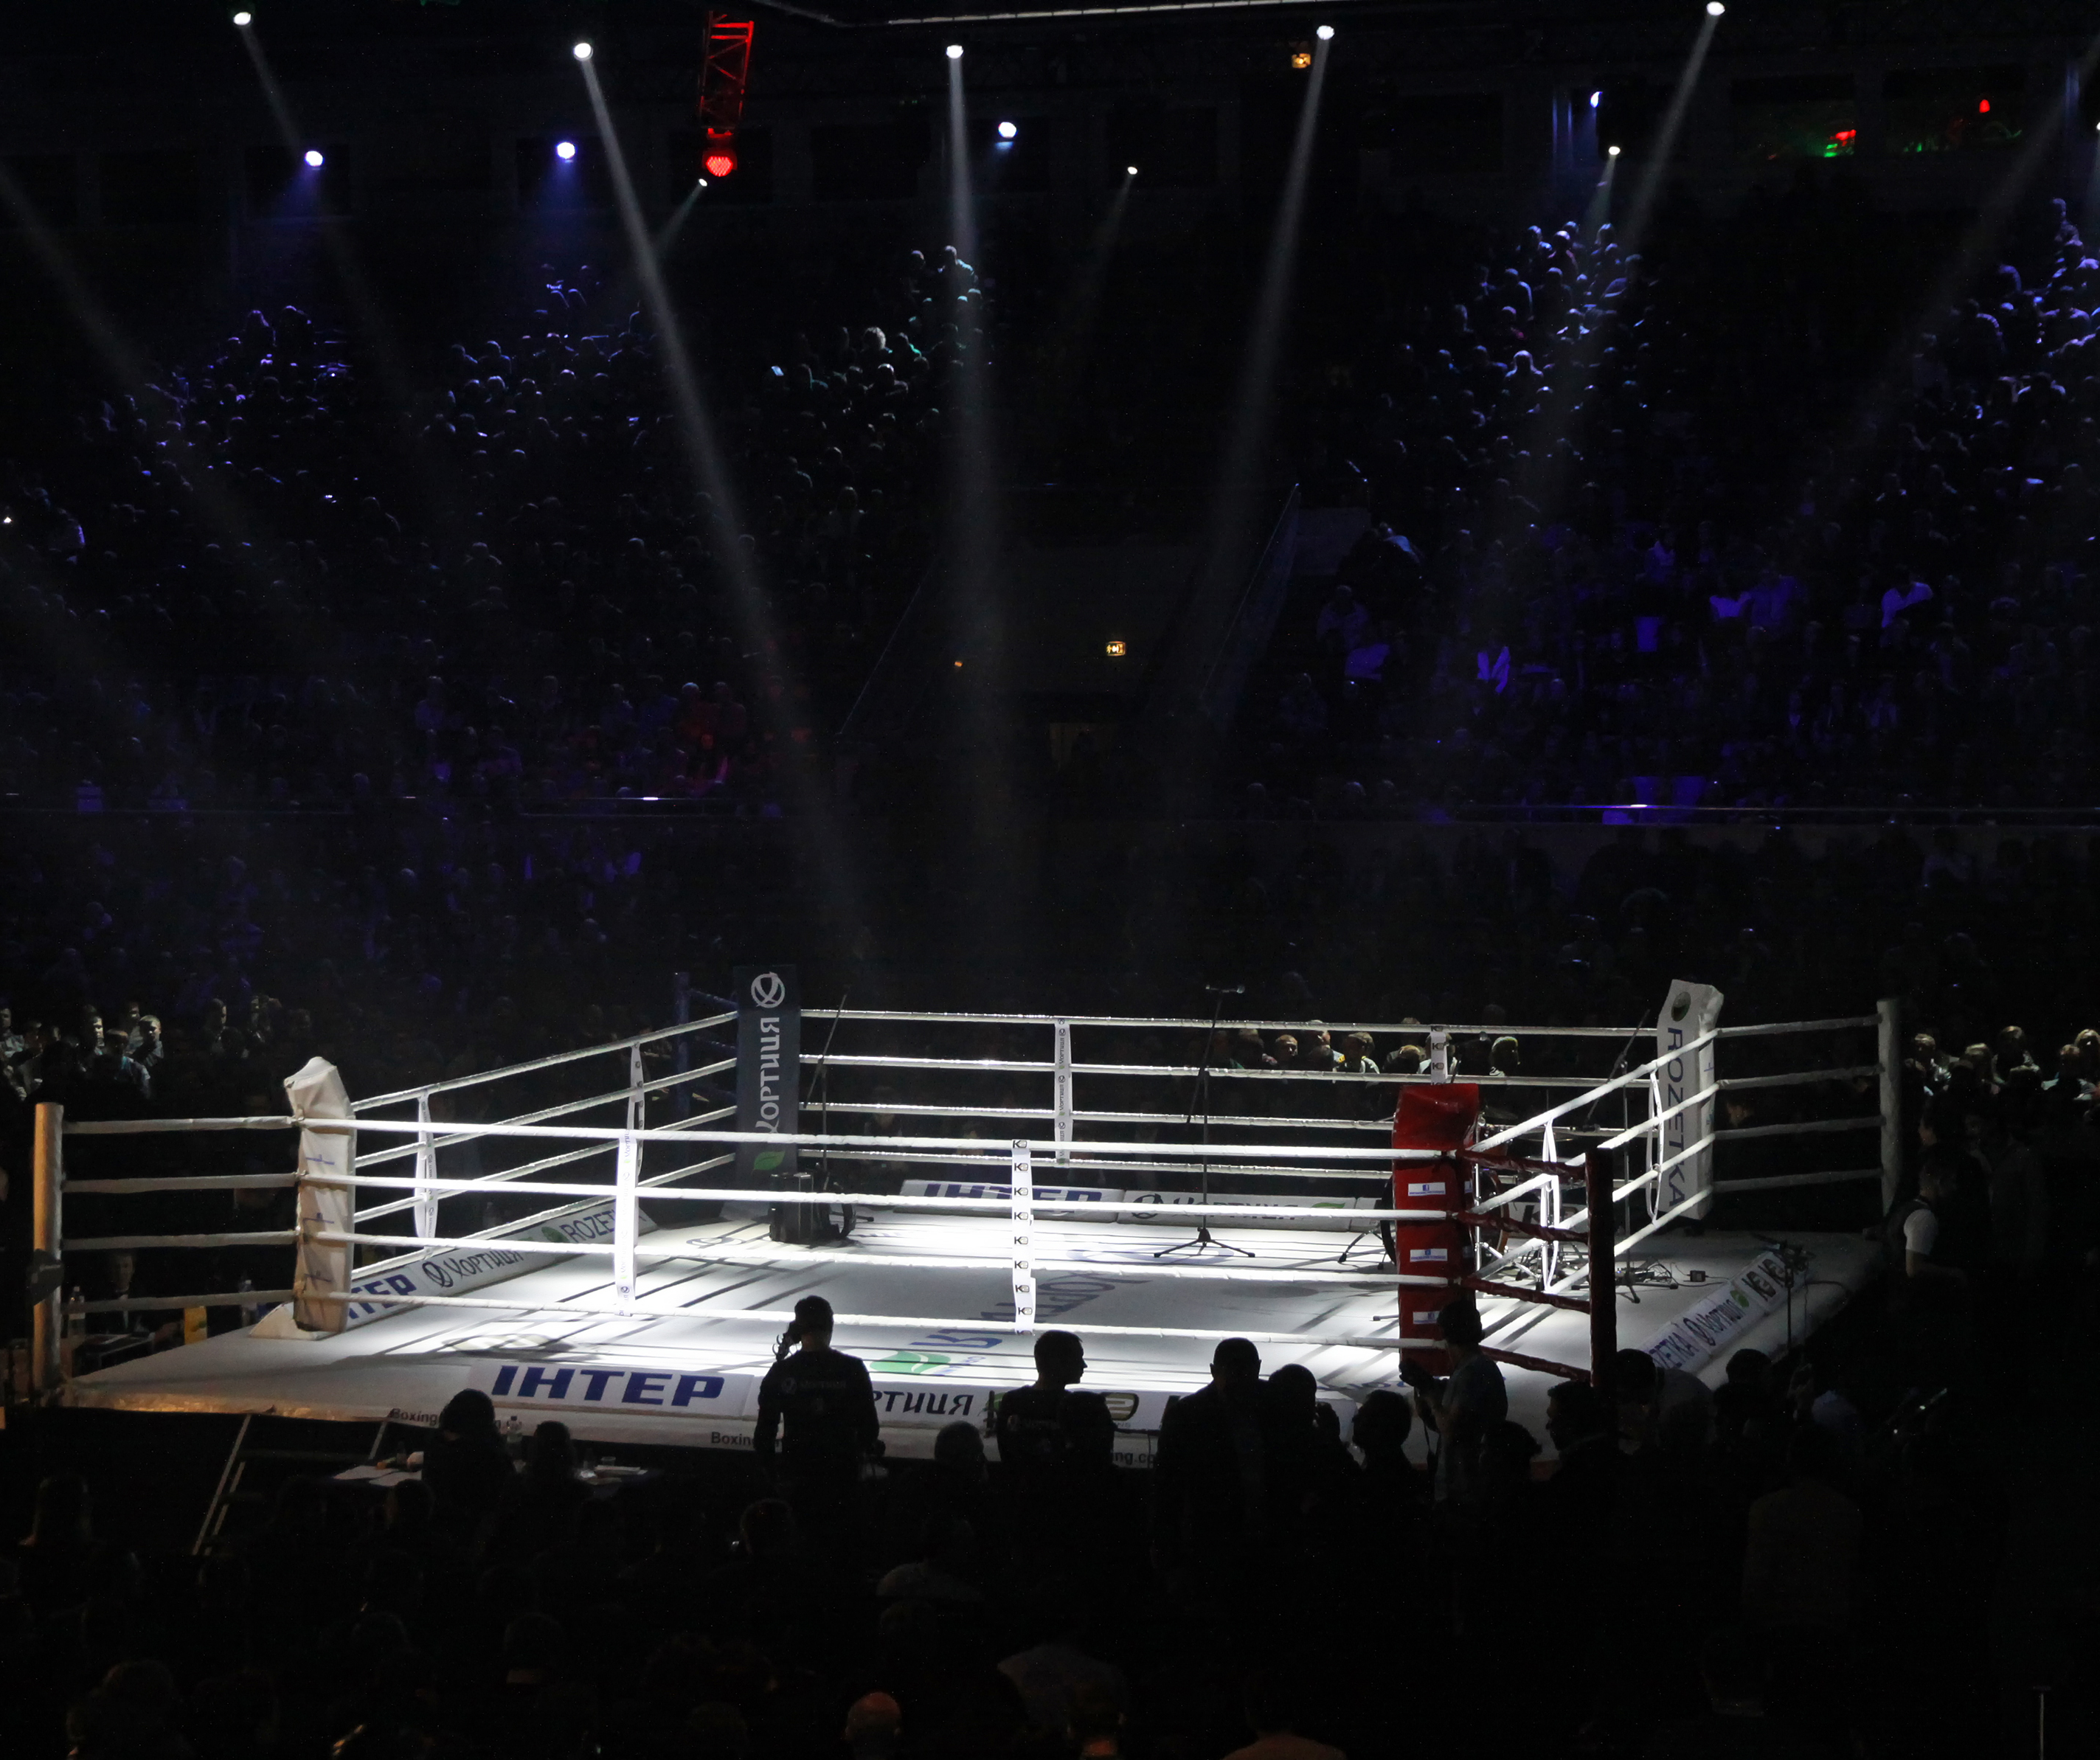 'What safety measures are taken in the boxing ring to protect fighters and officials?